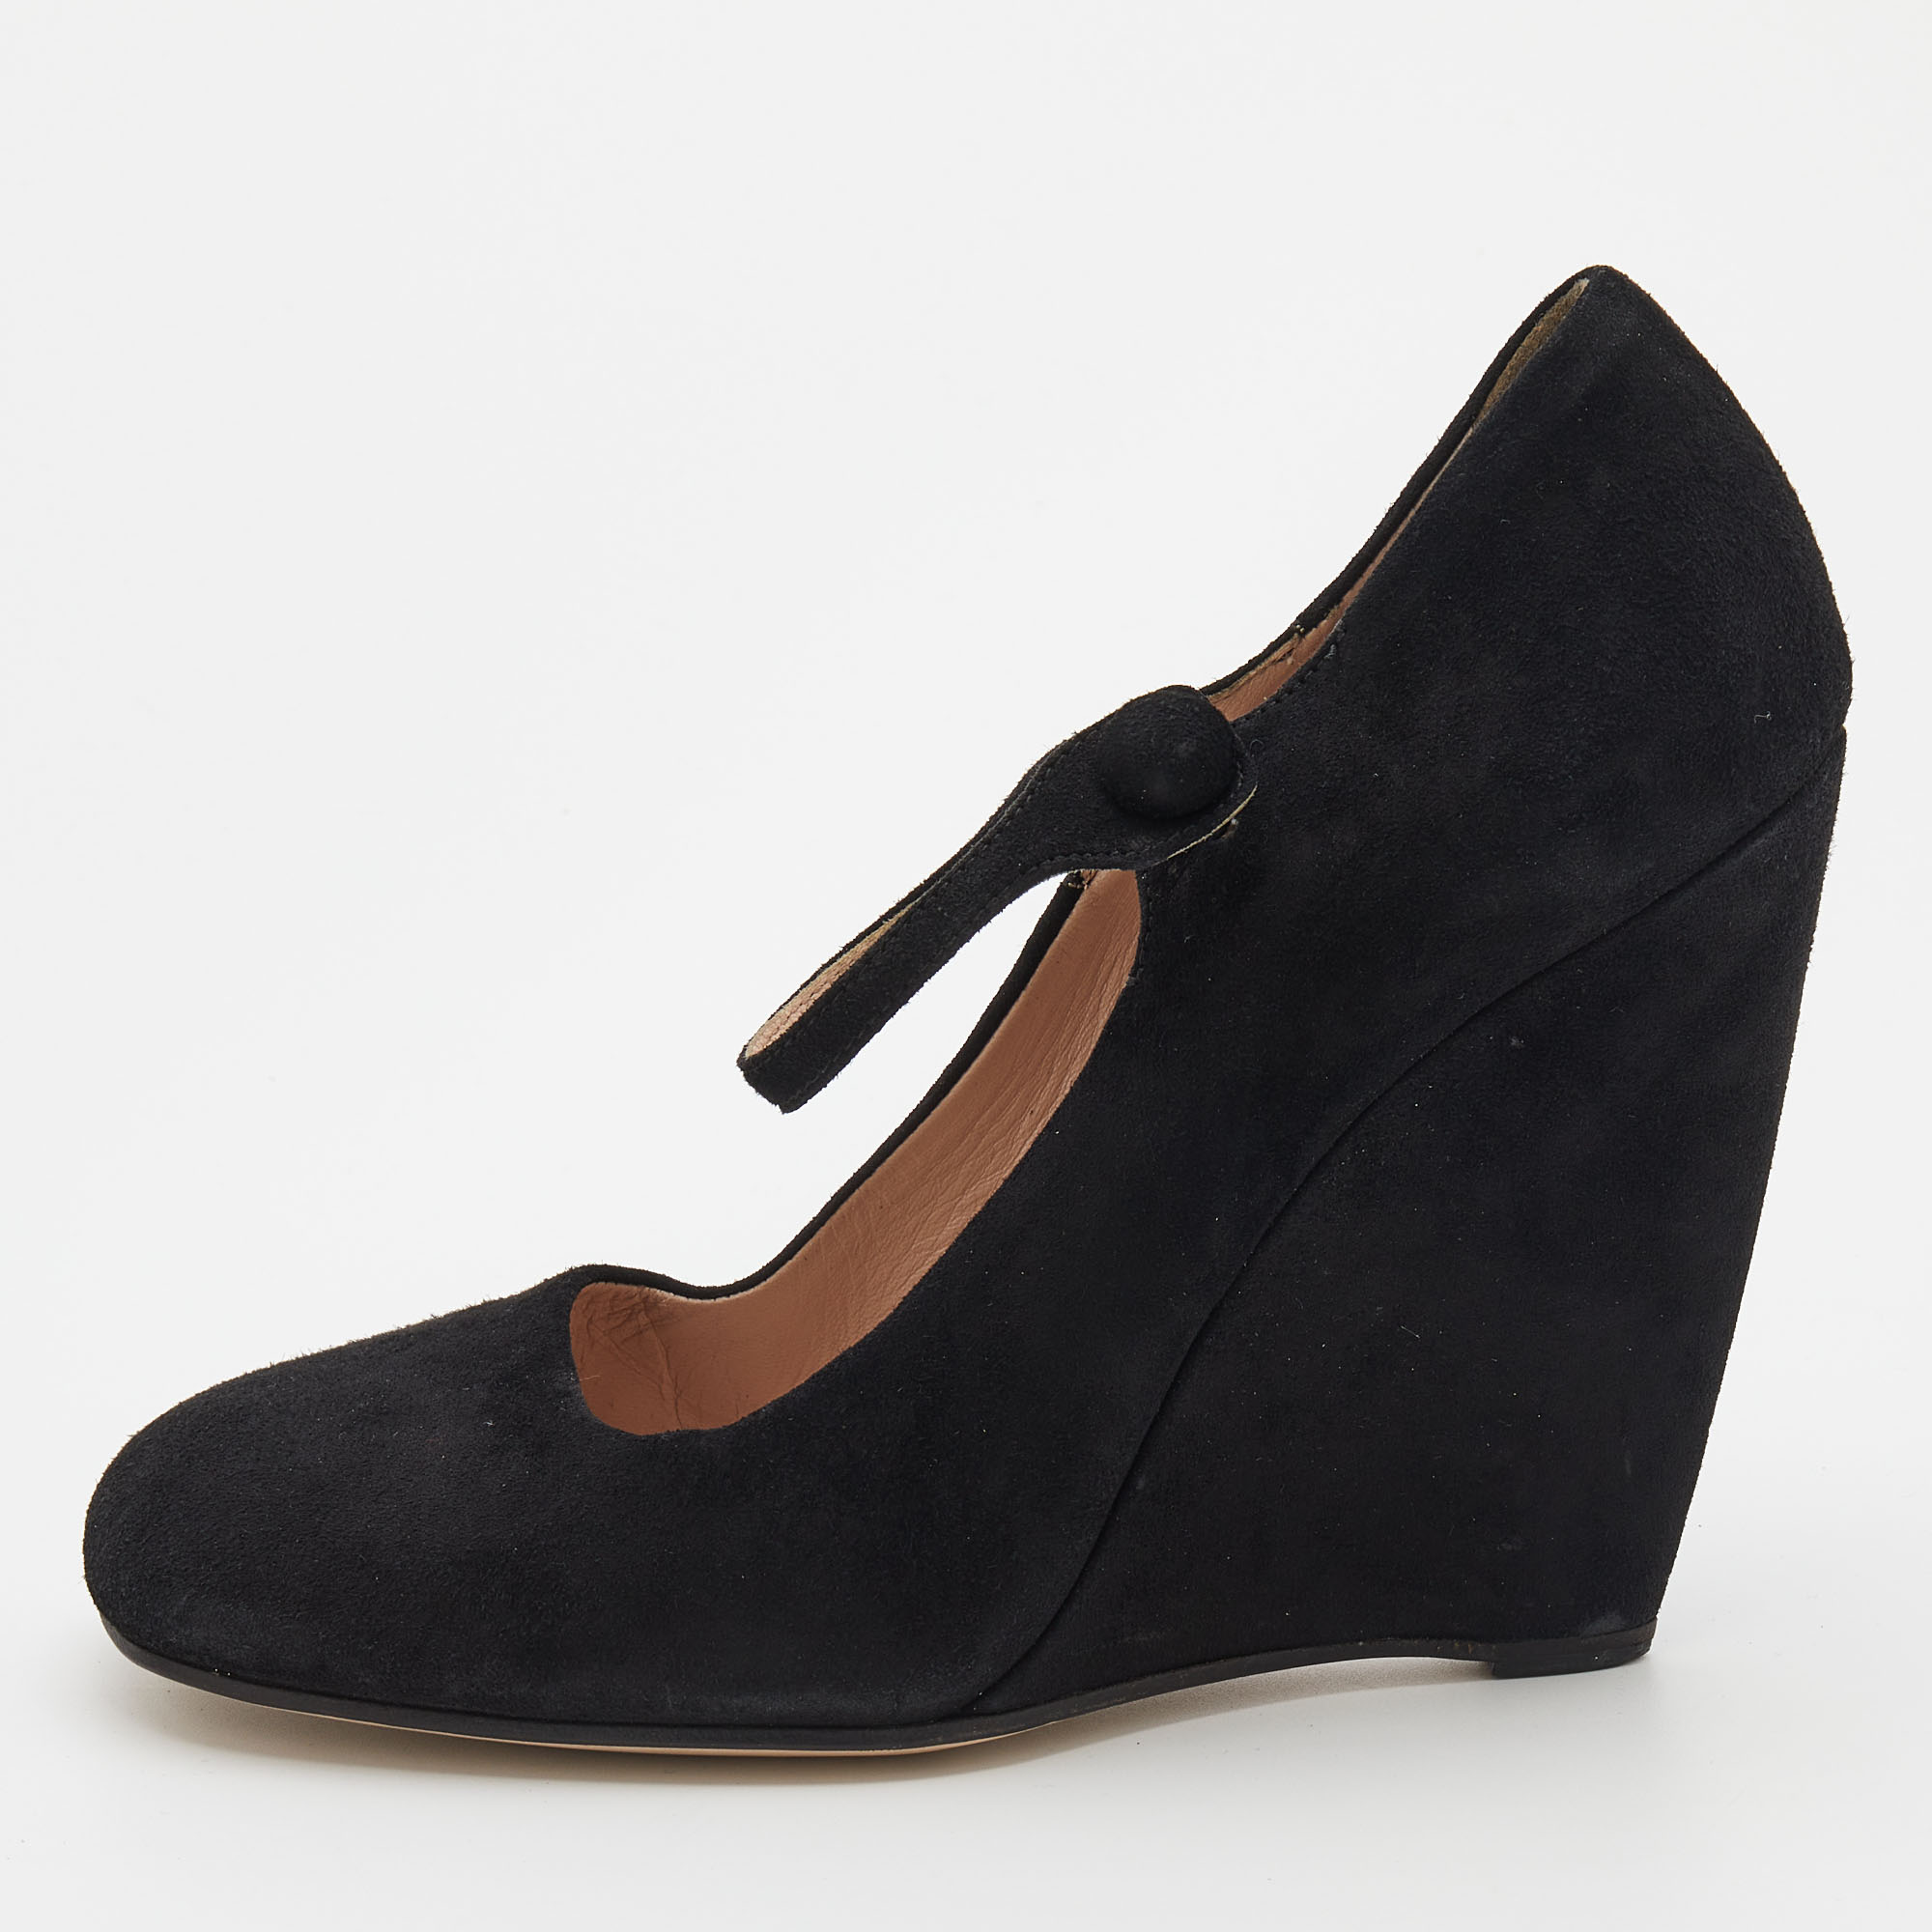 These pumps from Miu Miu are designed to bring comfort and style at the same time. They are made from black suede and added with square toes Mary Jane ankle straps leather lining and wedge heels.